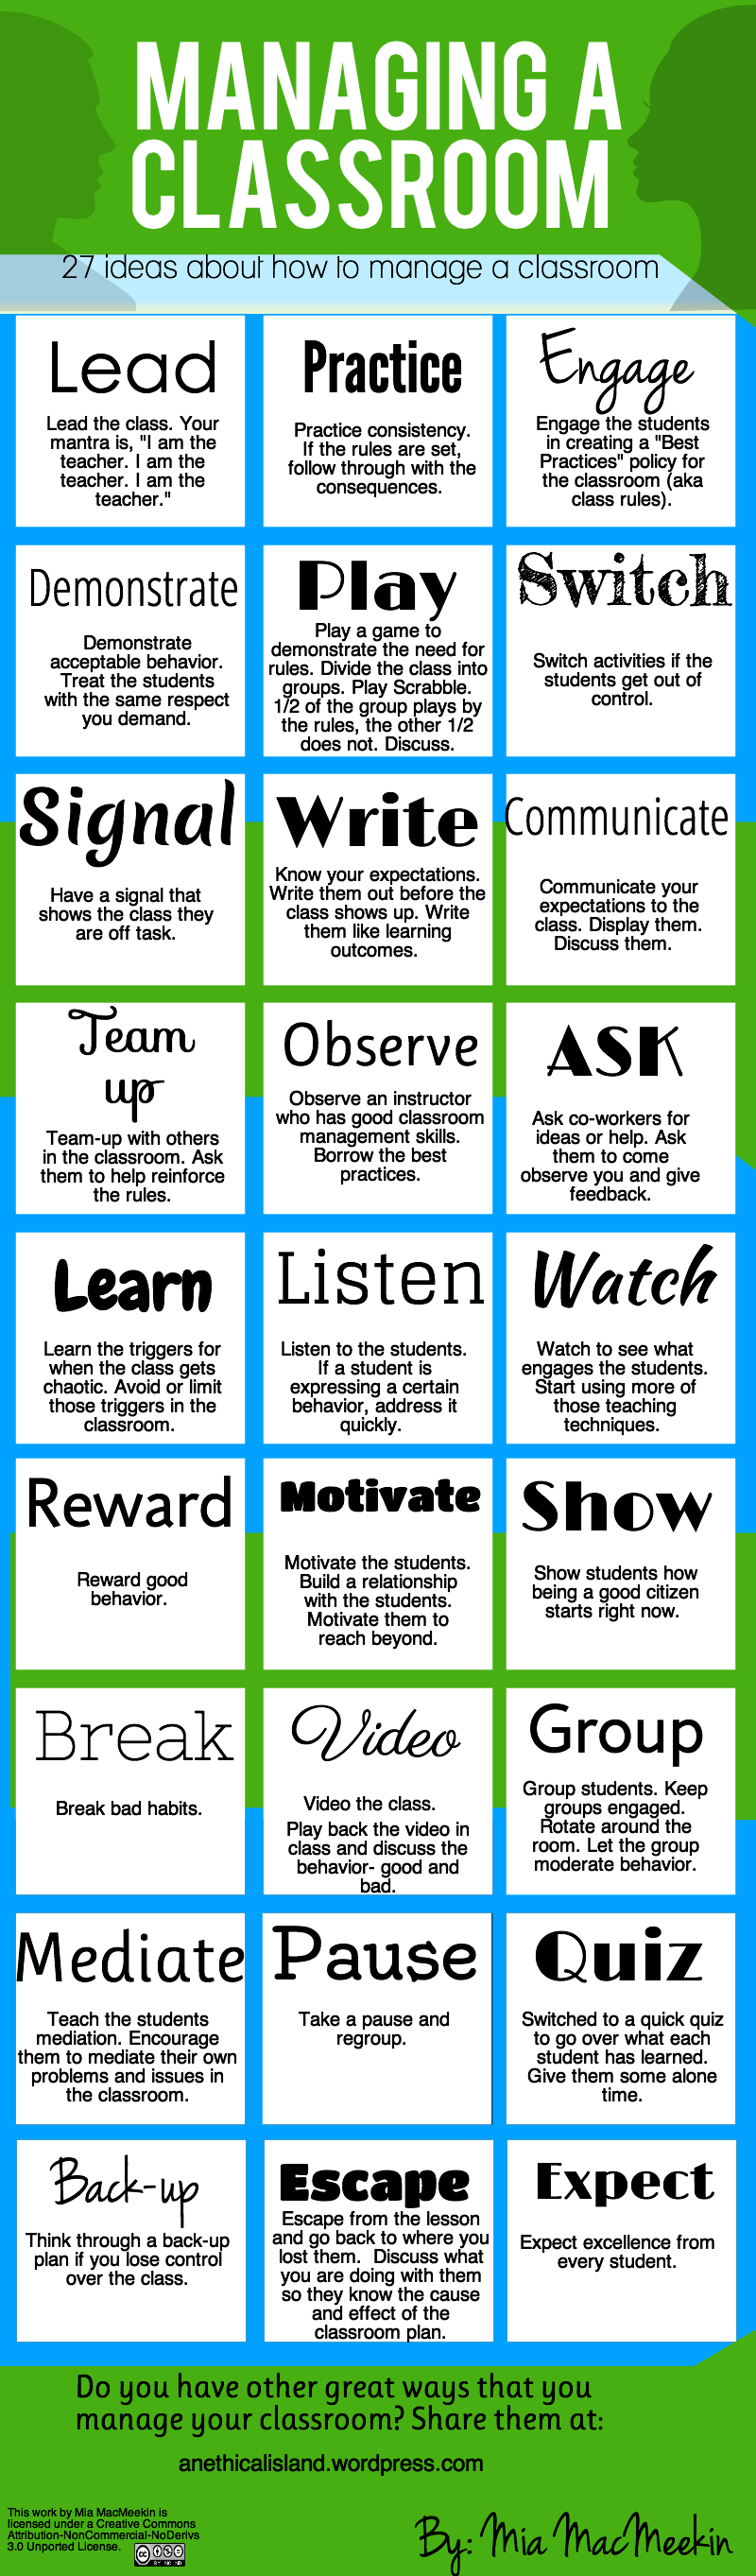 27 Tips for Effective Classroom Management Infographic